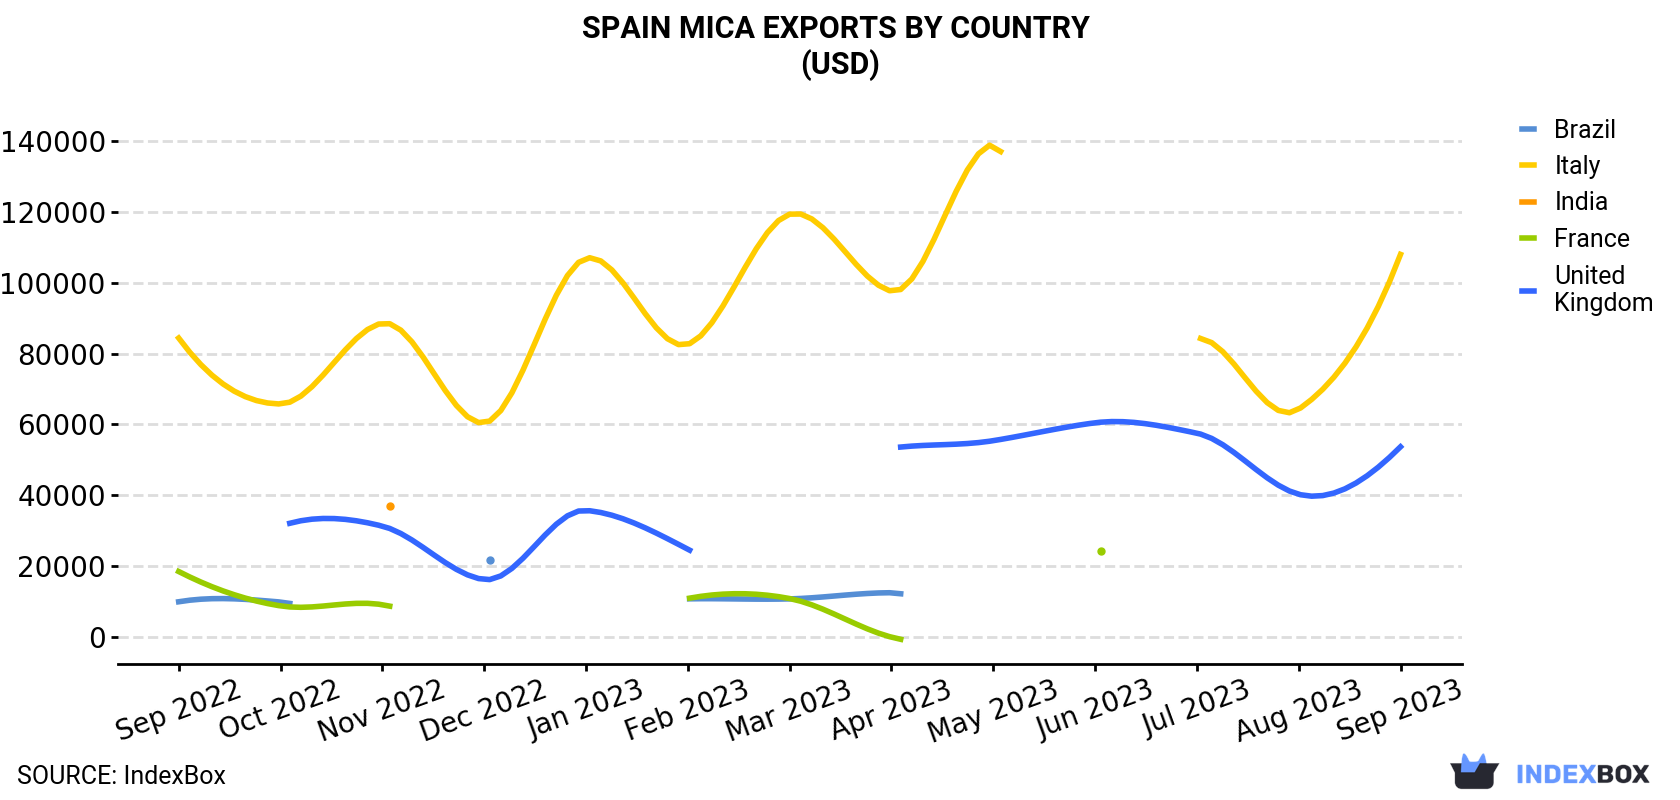 Spain Mica Exports By Country (USD)